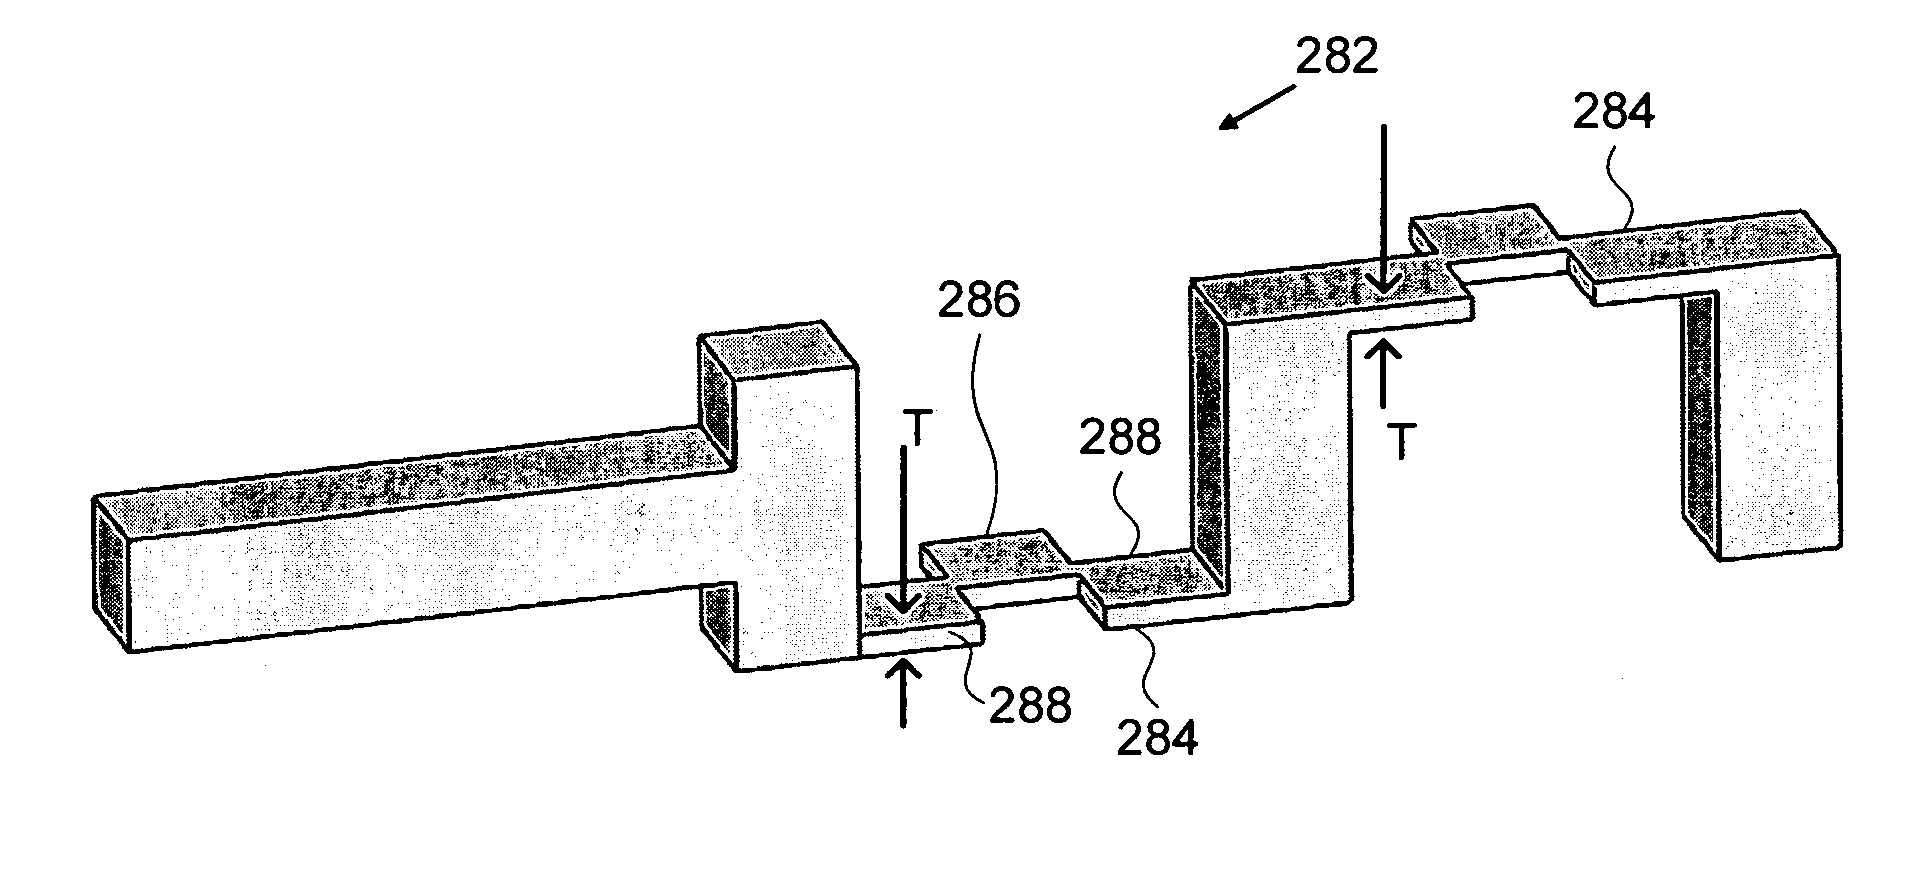 Pin-type probes for contacting electronic circuits and methods for making such probes